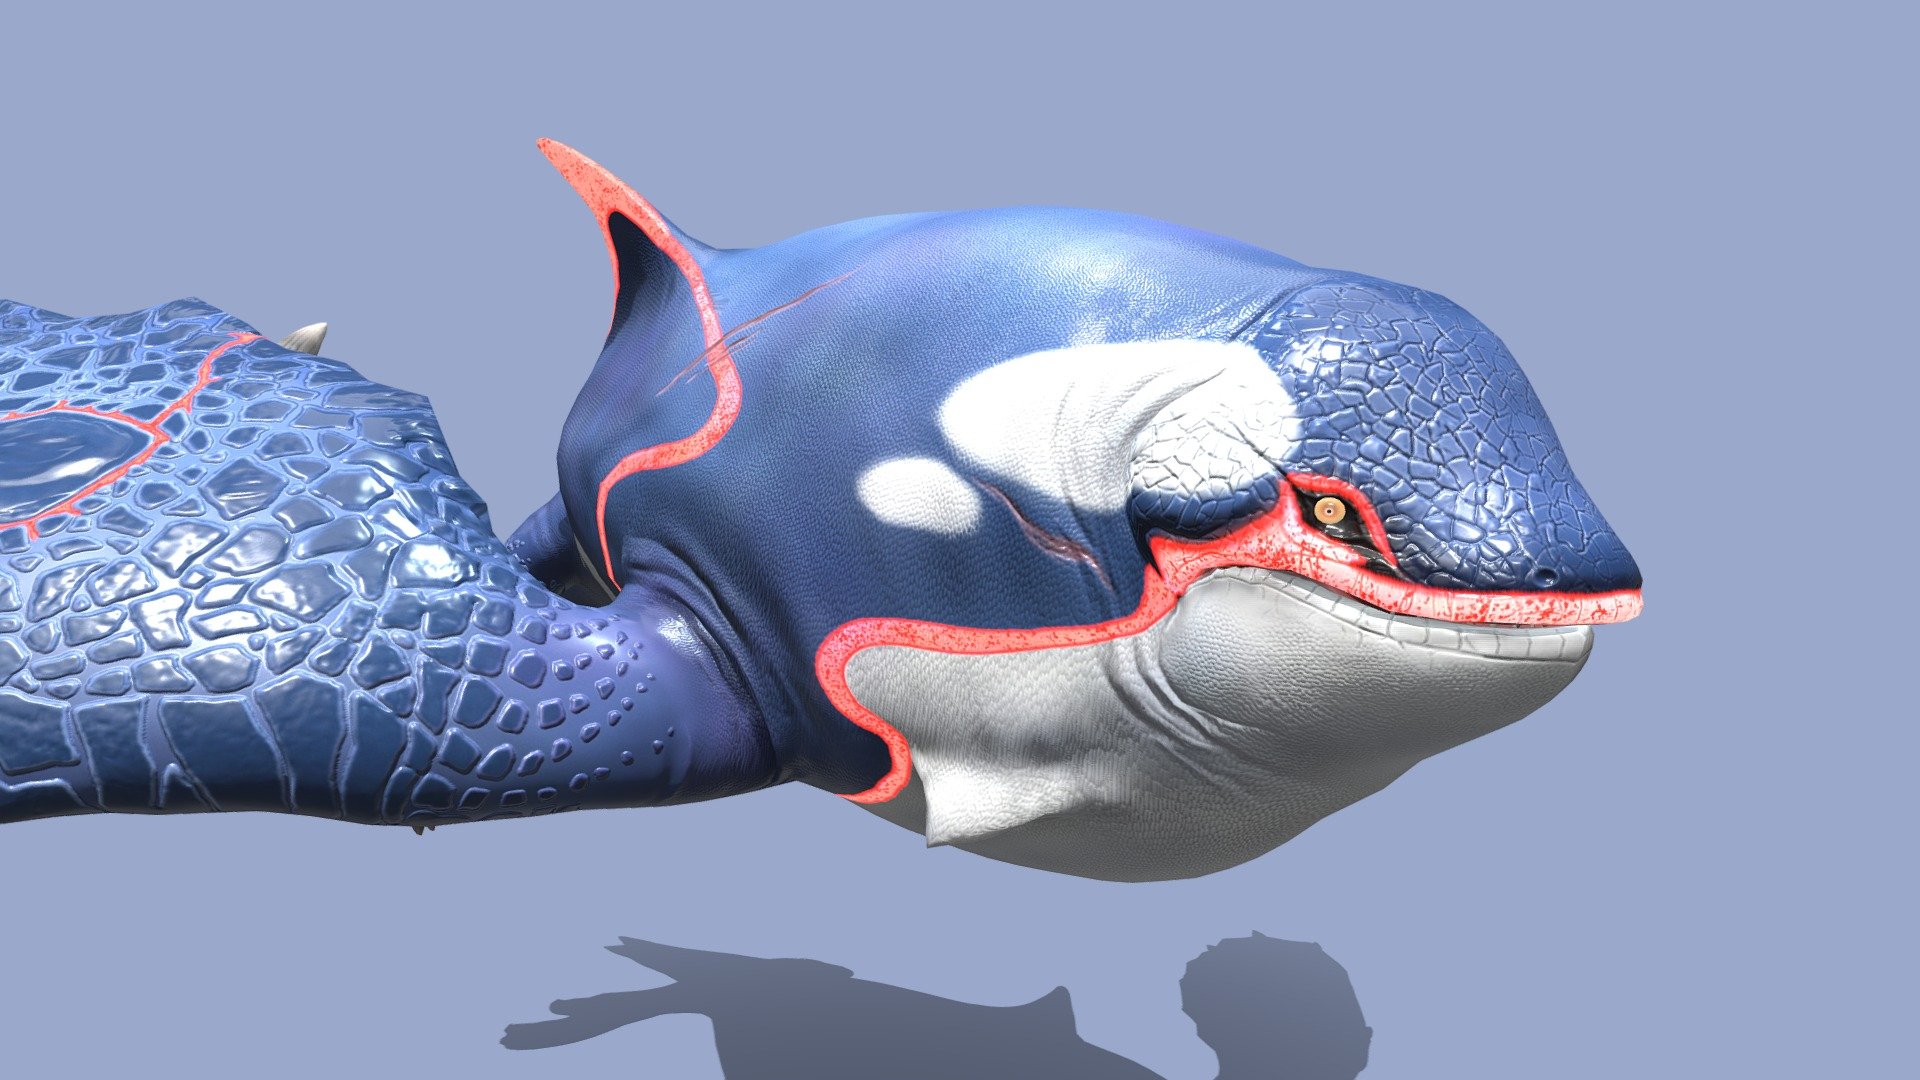 A realistic take on Kyogre based on the incredible concept by RJ Palmer! I saw his concept of this Pokemon a while ago and knew I wanted to take a shot at creating it in 3D, since it's one of my favorite legendaries. It was sculpted in Zbrush, baked and textured in Substance Painter and rigged and animated in 3DS Max 3d model